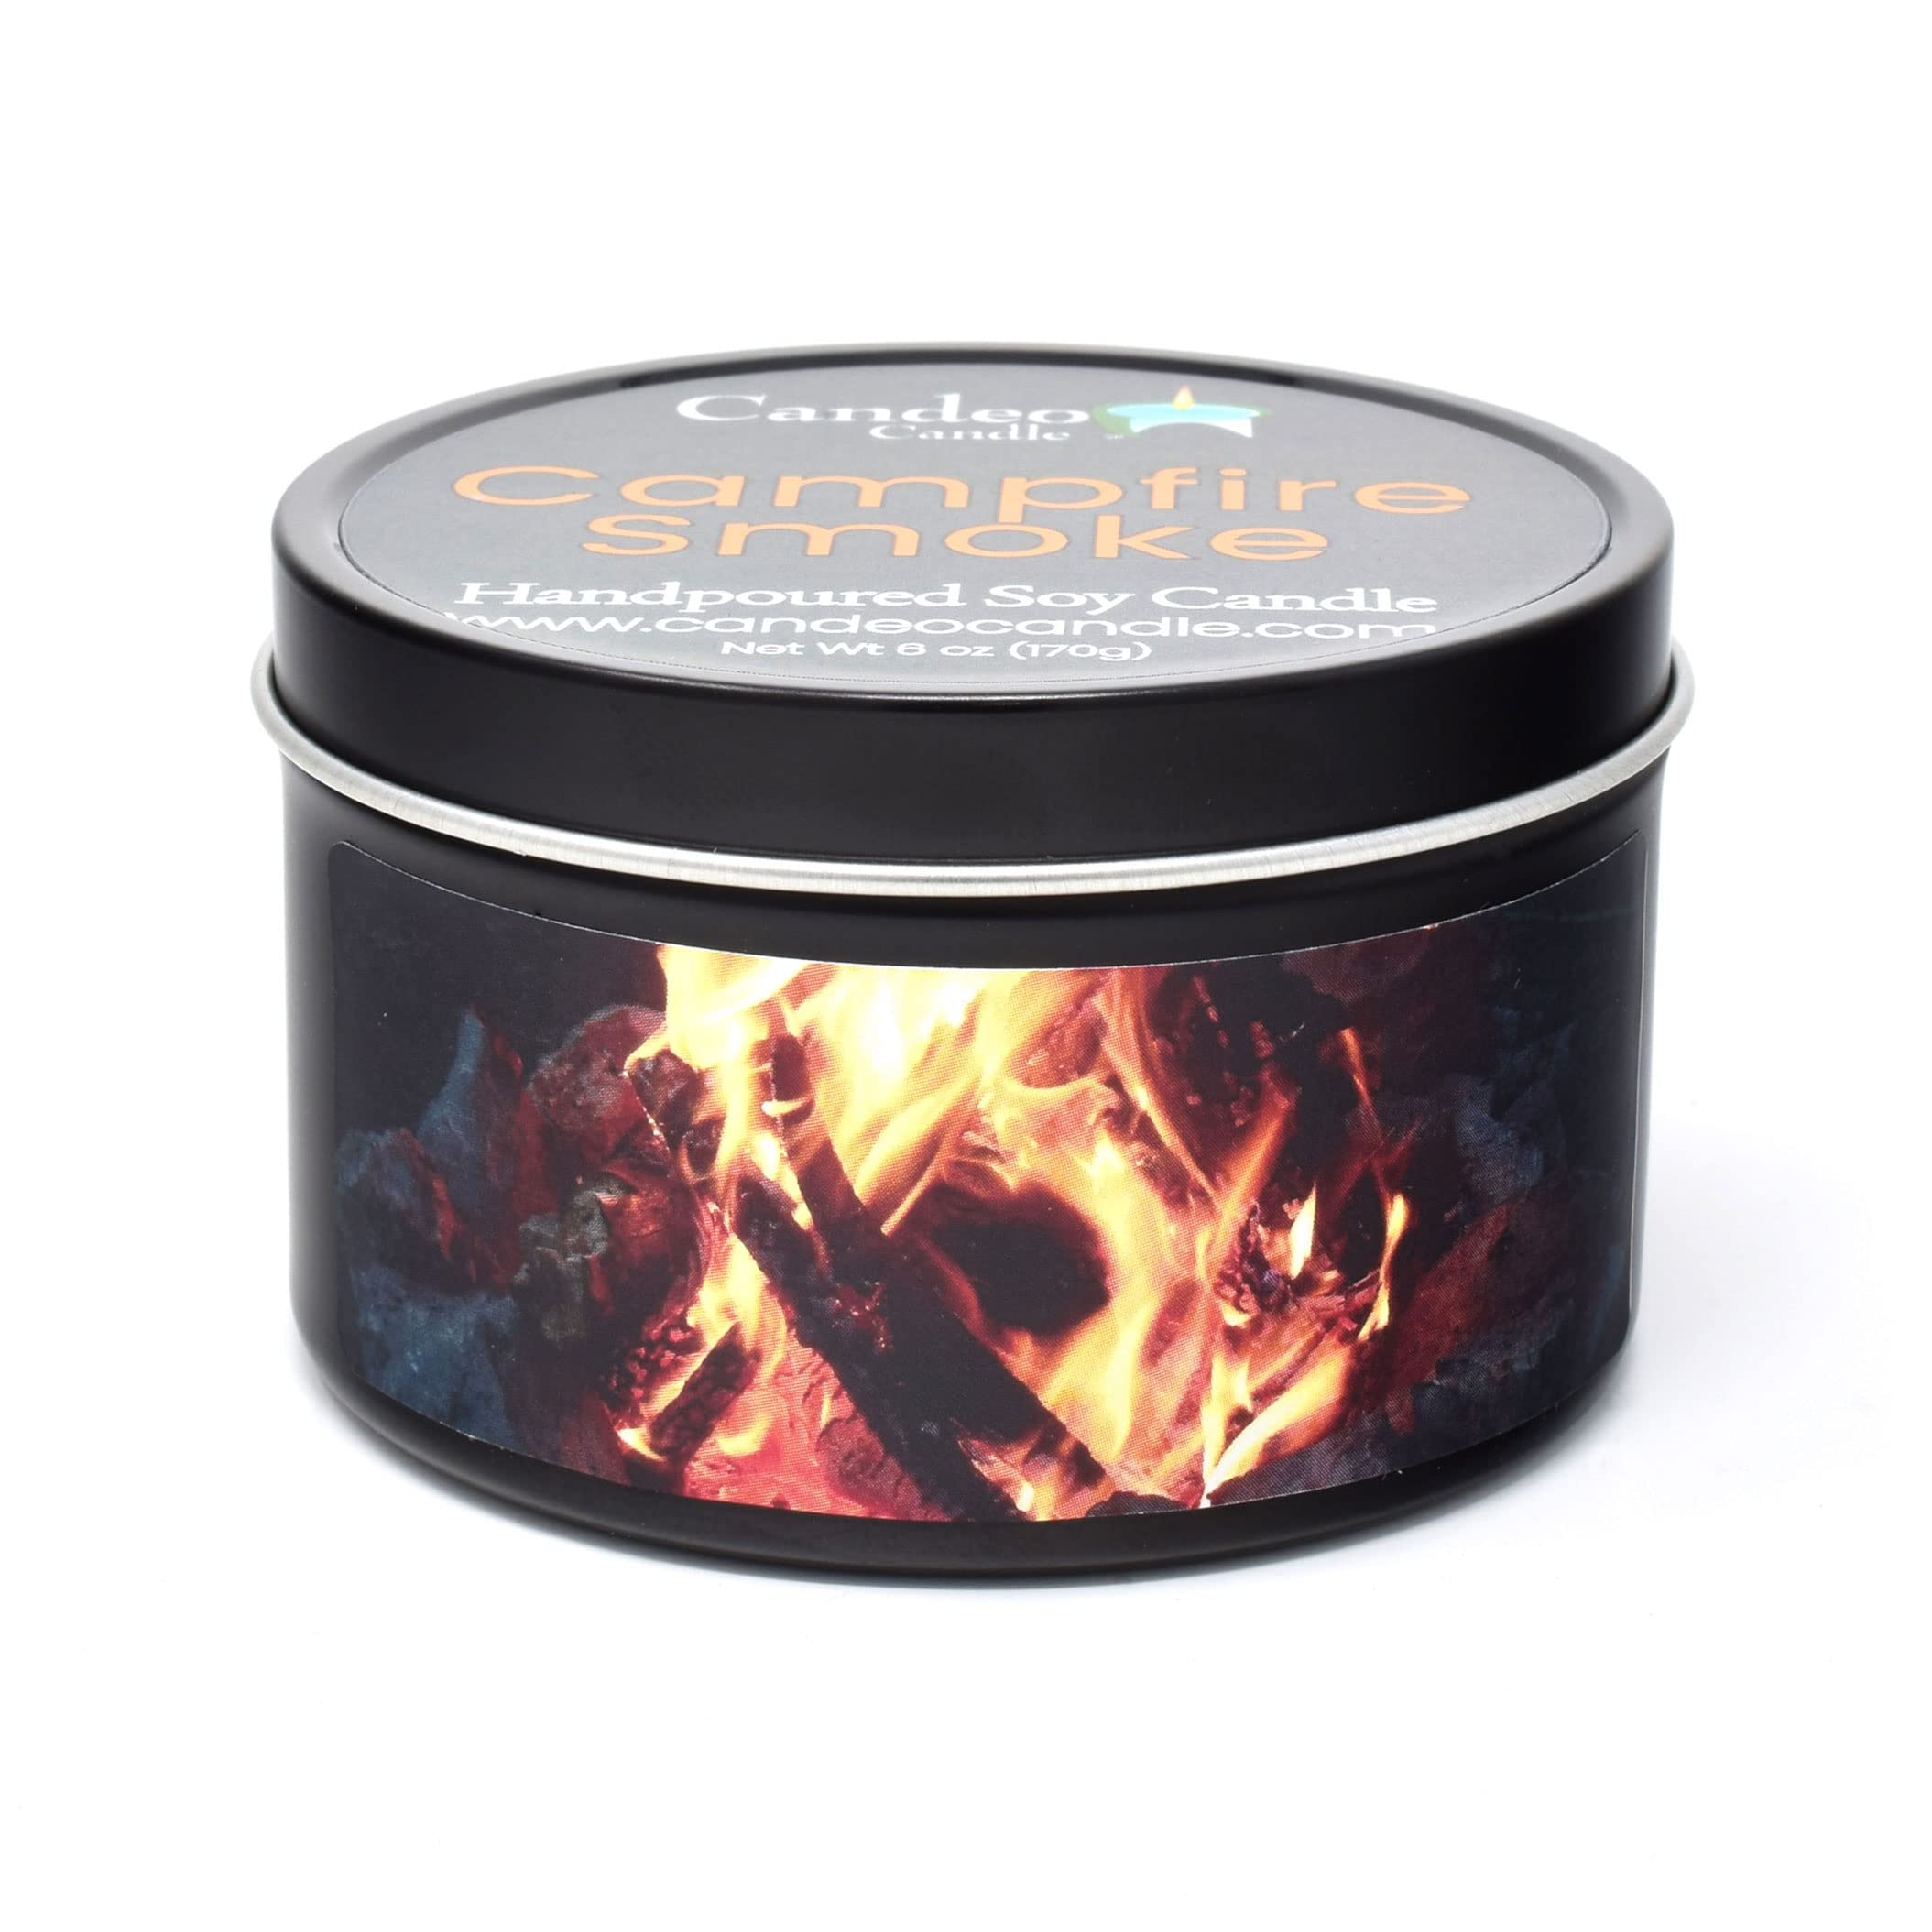 Campfire Smoke Soy Candle -Large Travel Tins, 6oz - Highly Scented - Made with Soy Wax - Handmade in The USA - Candeo Candle